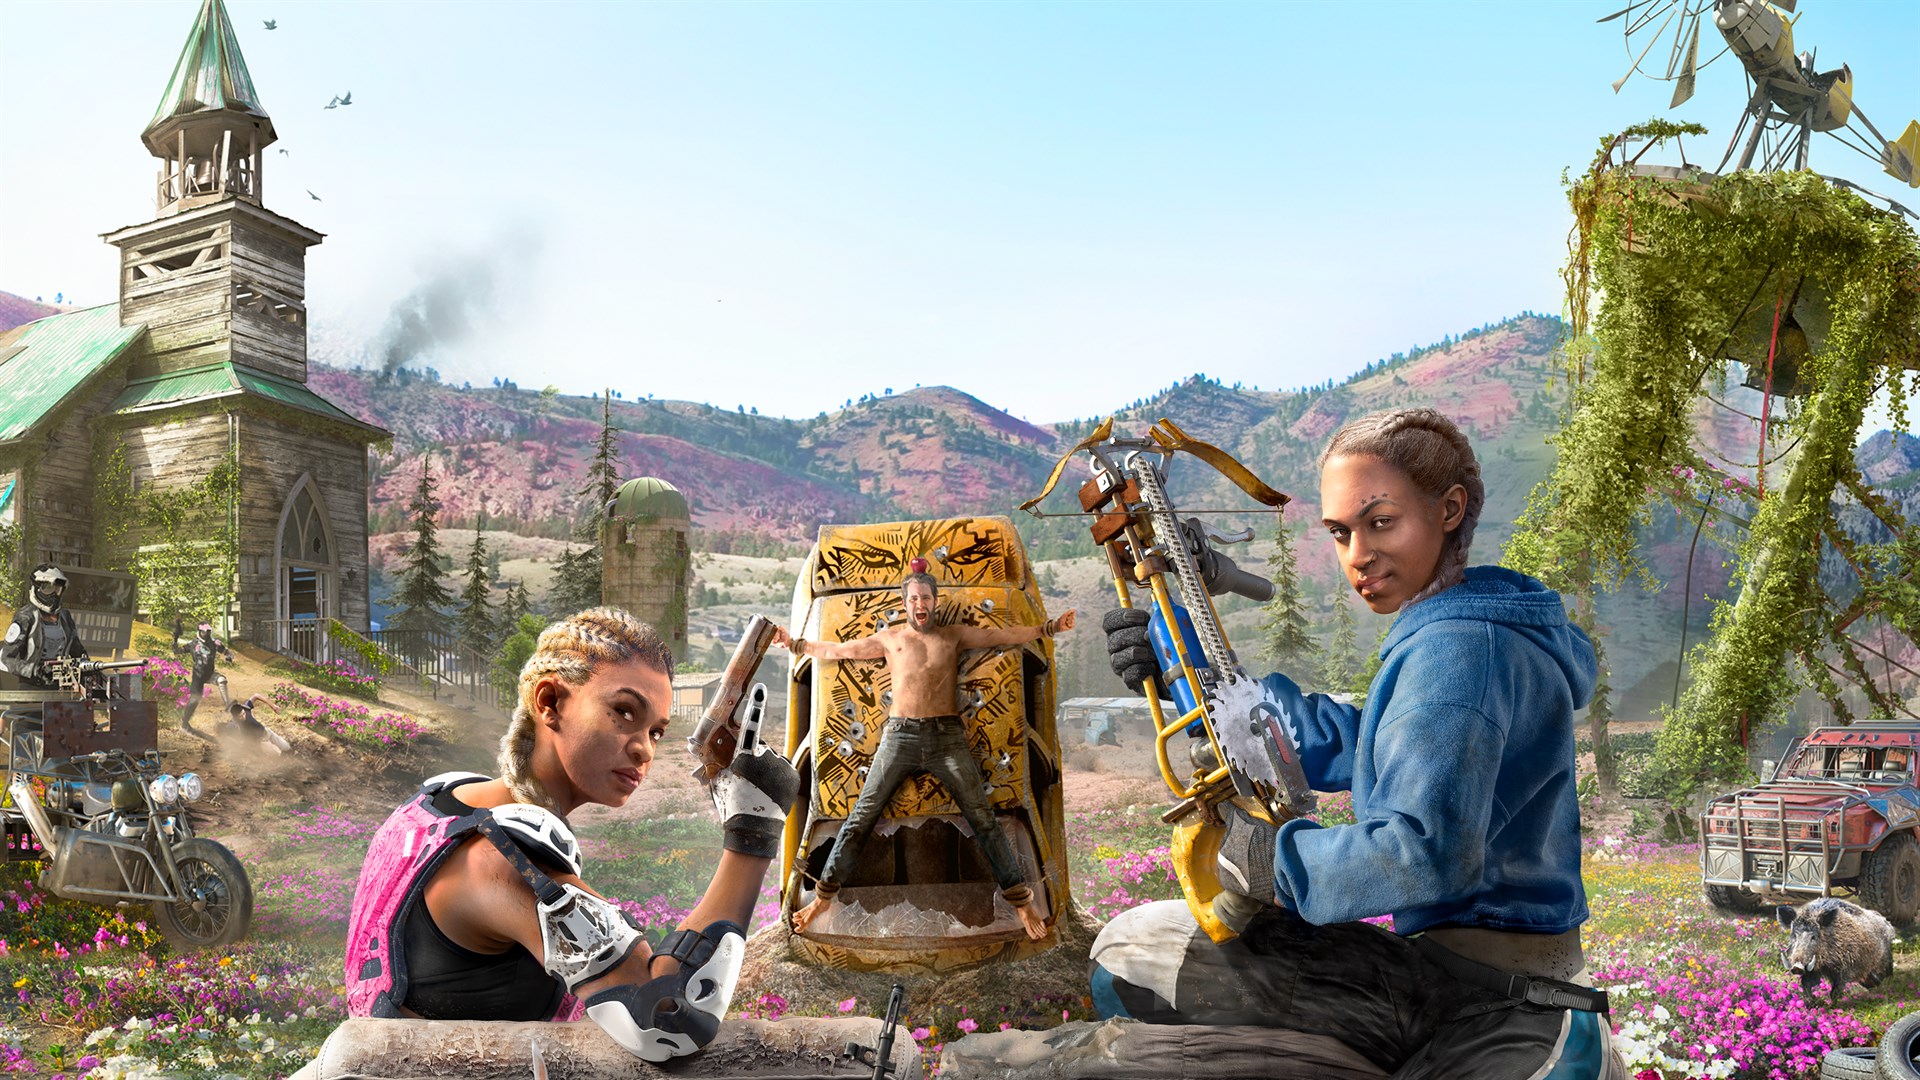 Far Cry New Dawn Deluxe Edition XBOX ONE/Xbox Series